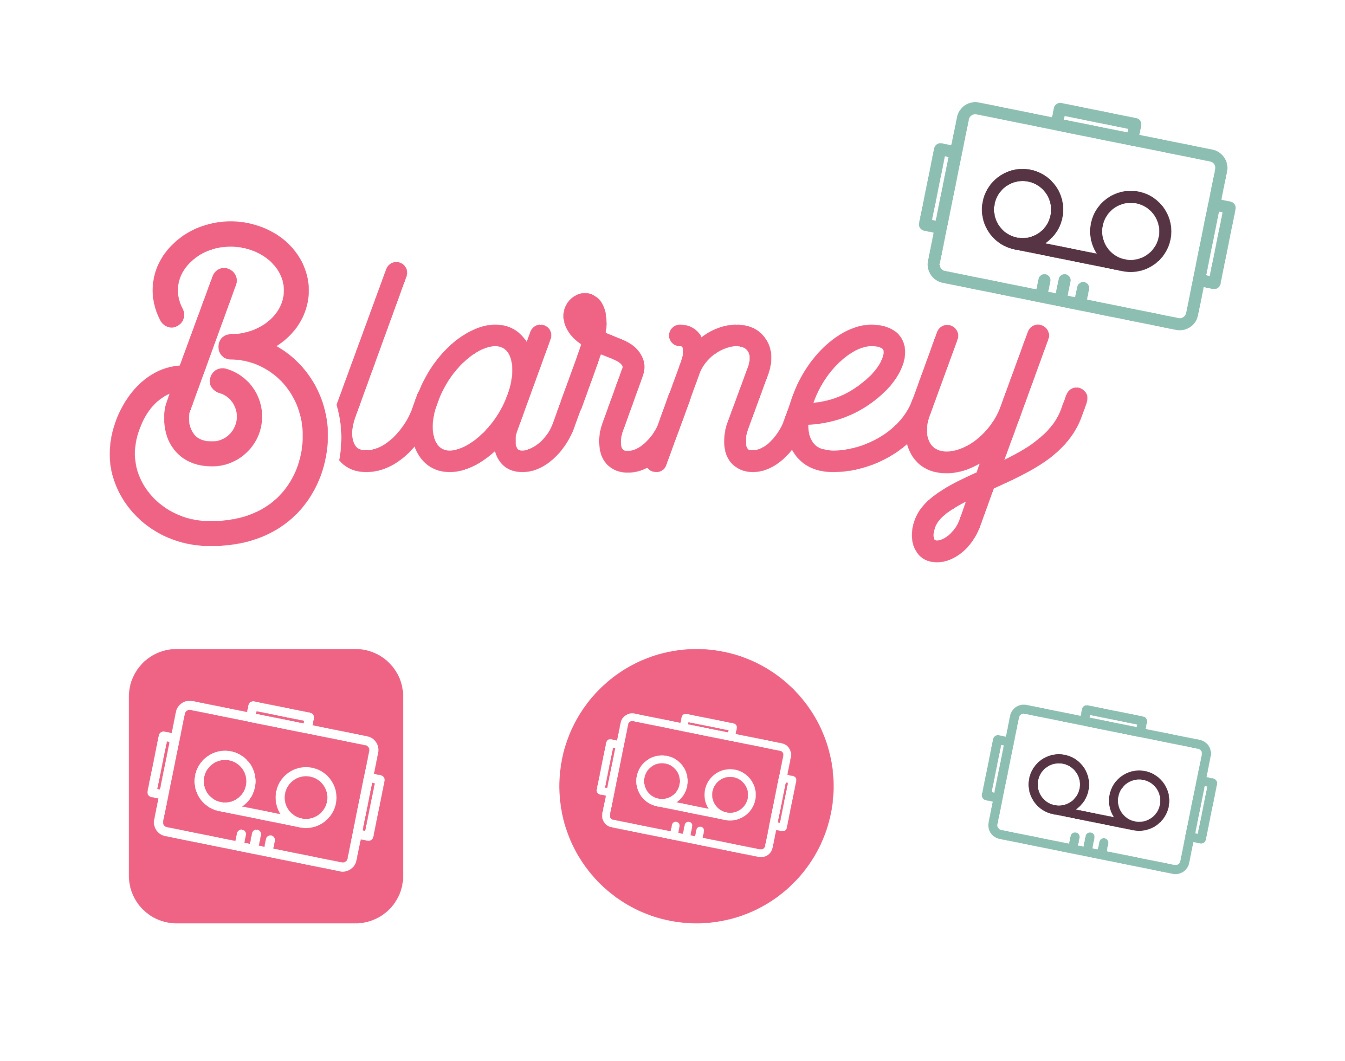 Figure 12: Blarney's brand is fun and playful, mixing the concept of a tape reel and a robot.